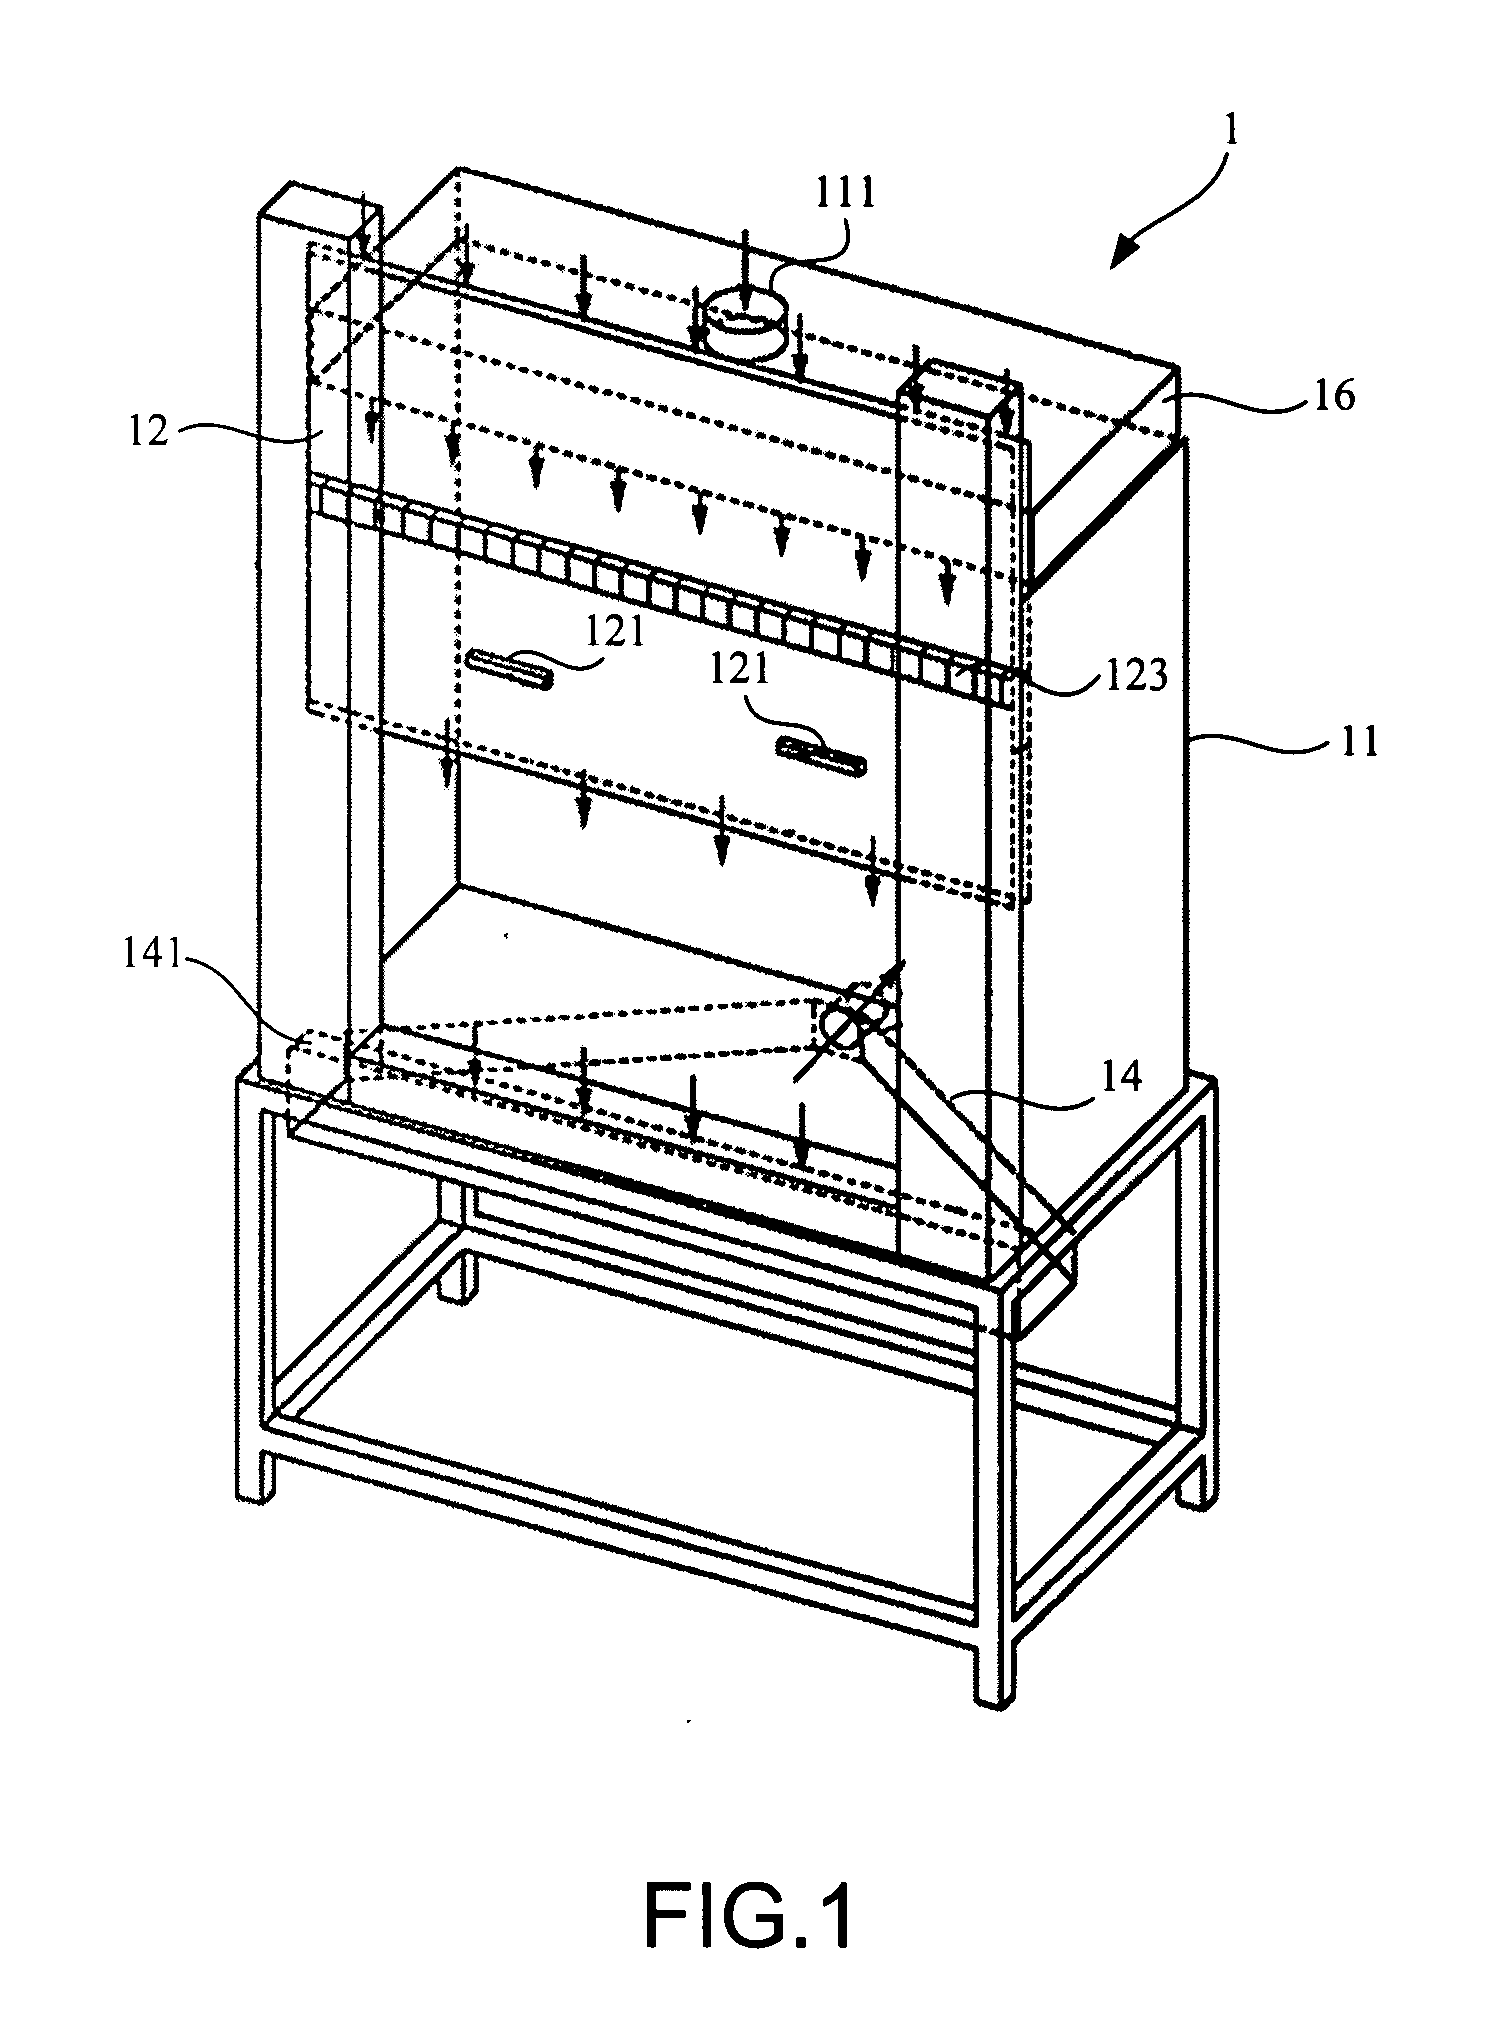 Air curtain-isolated biosafety cabinet